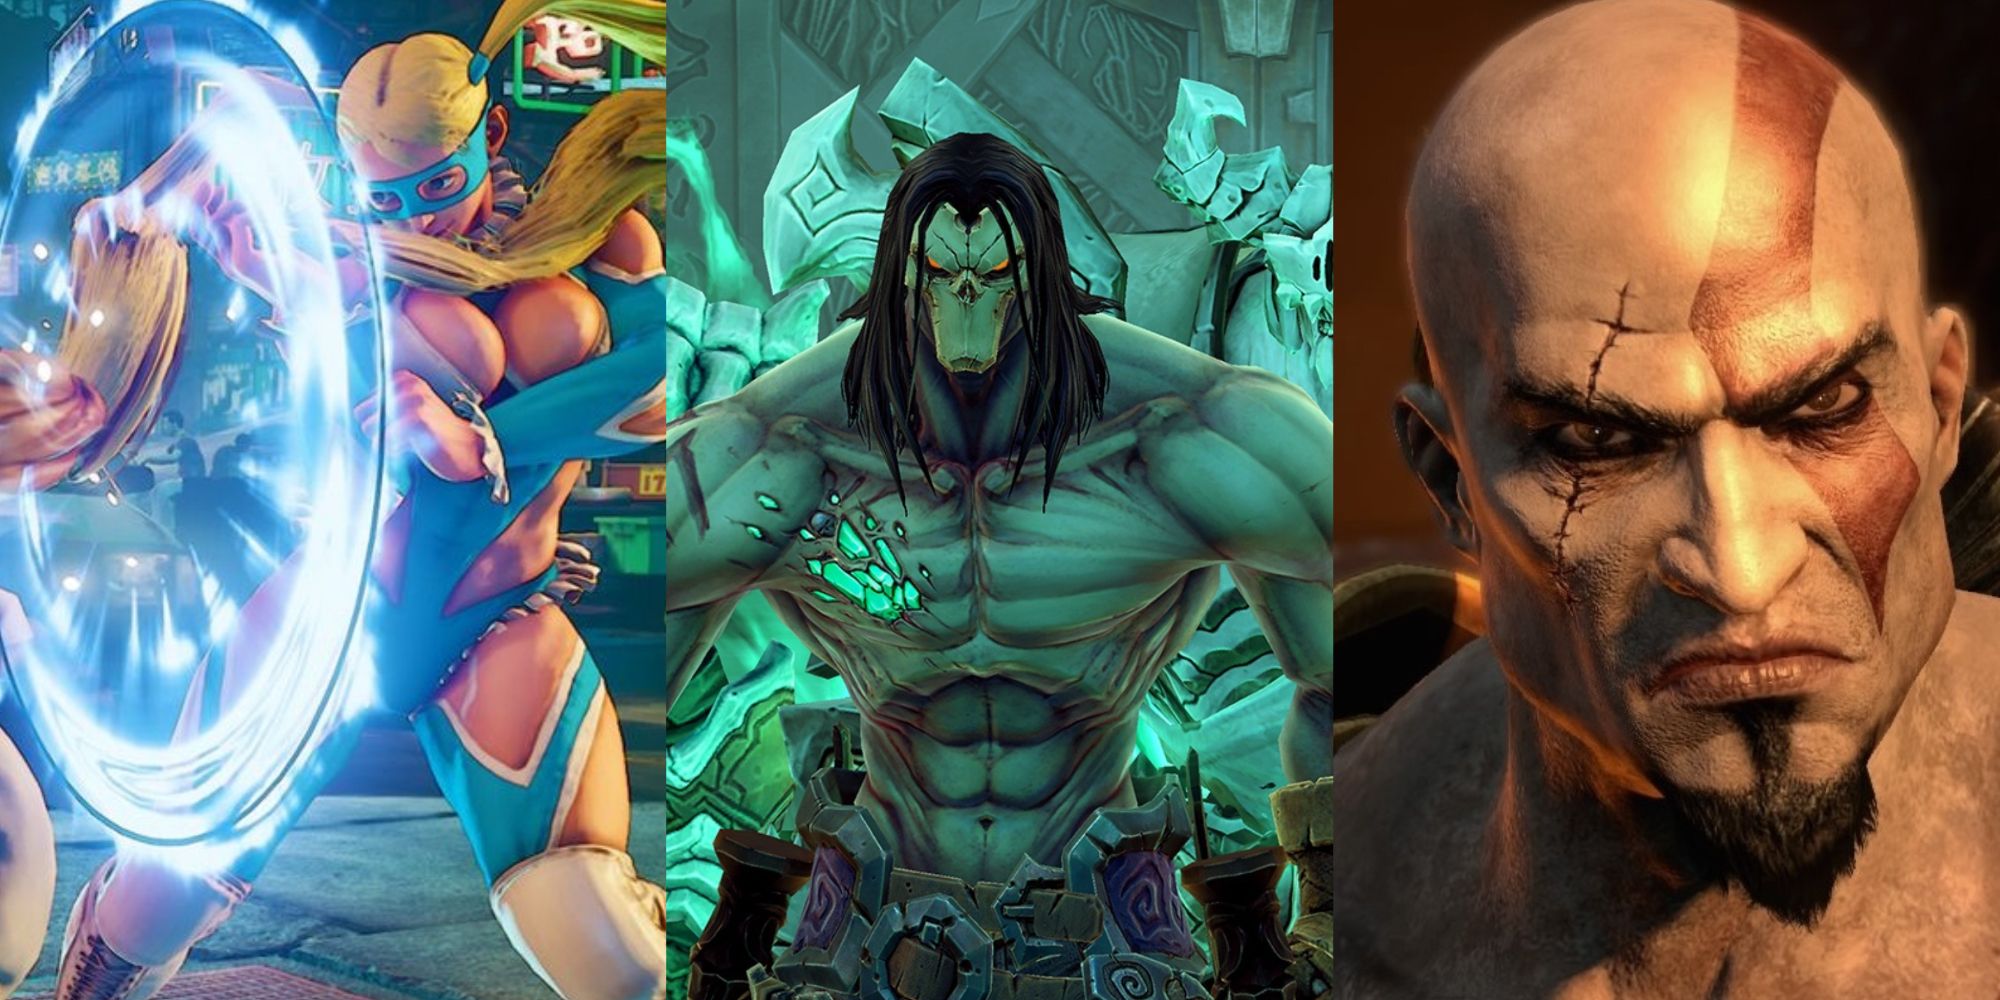 Street Fighter 5, Darksiders 2, and God of War 3